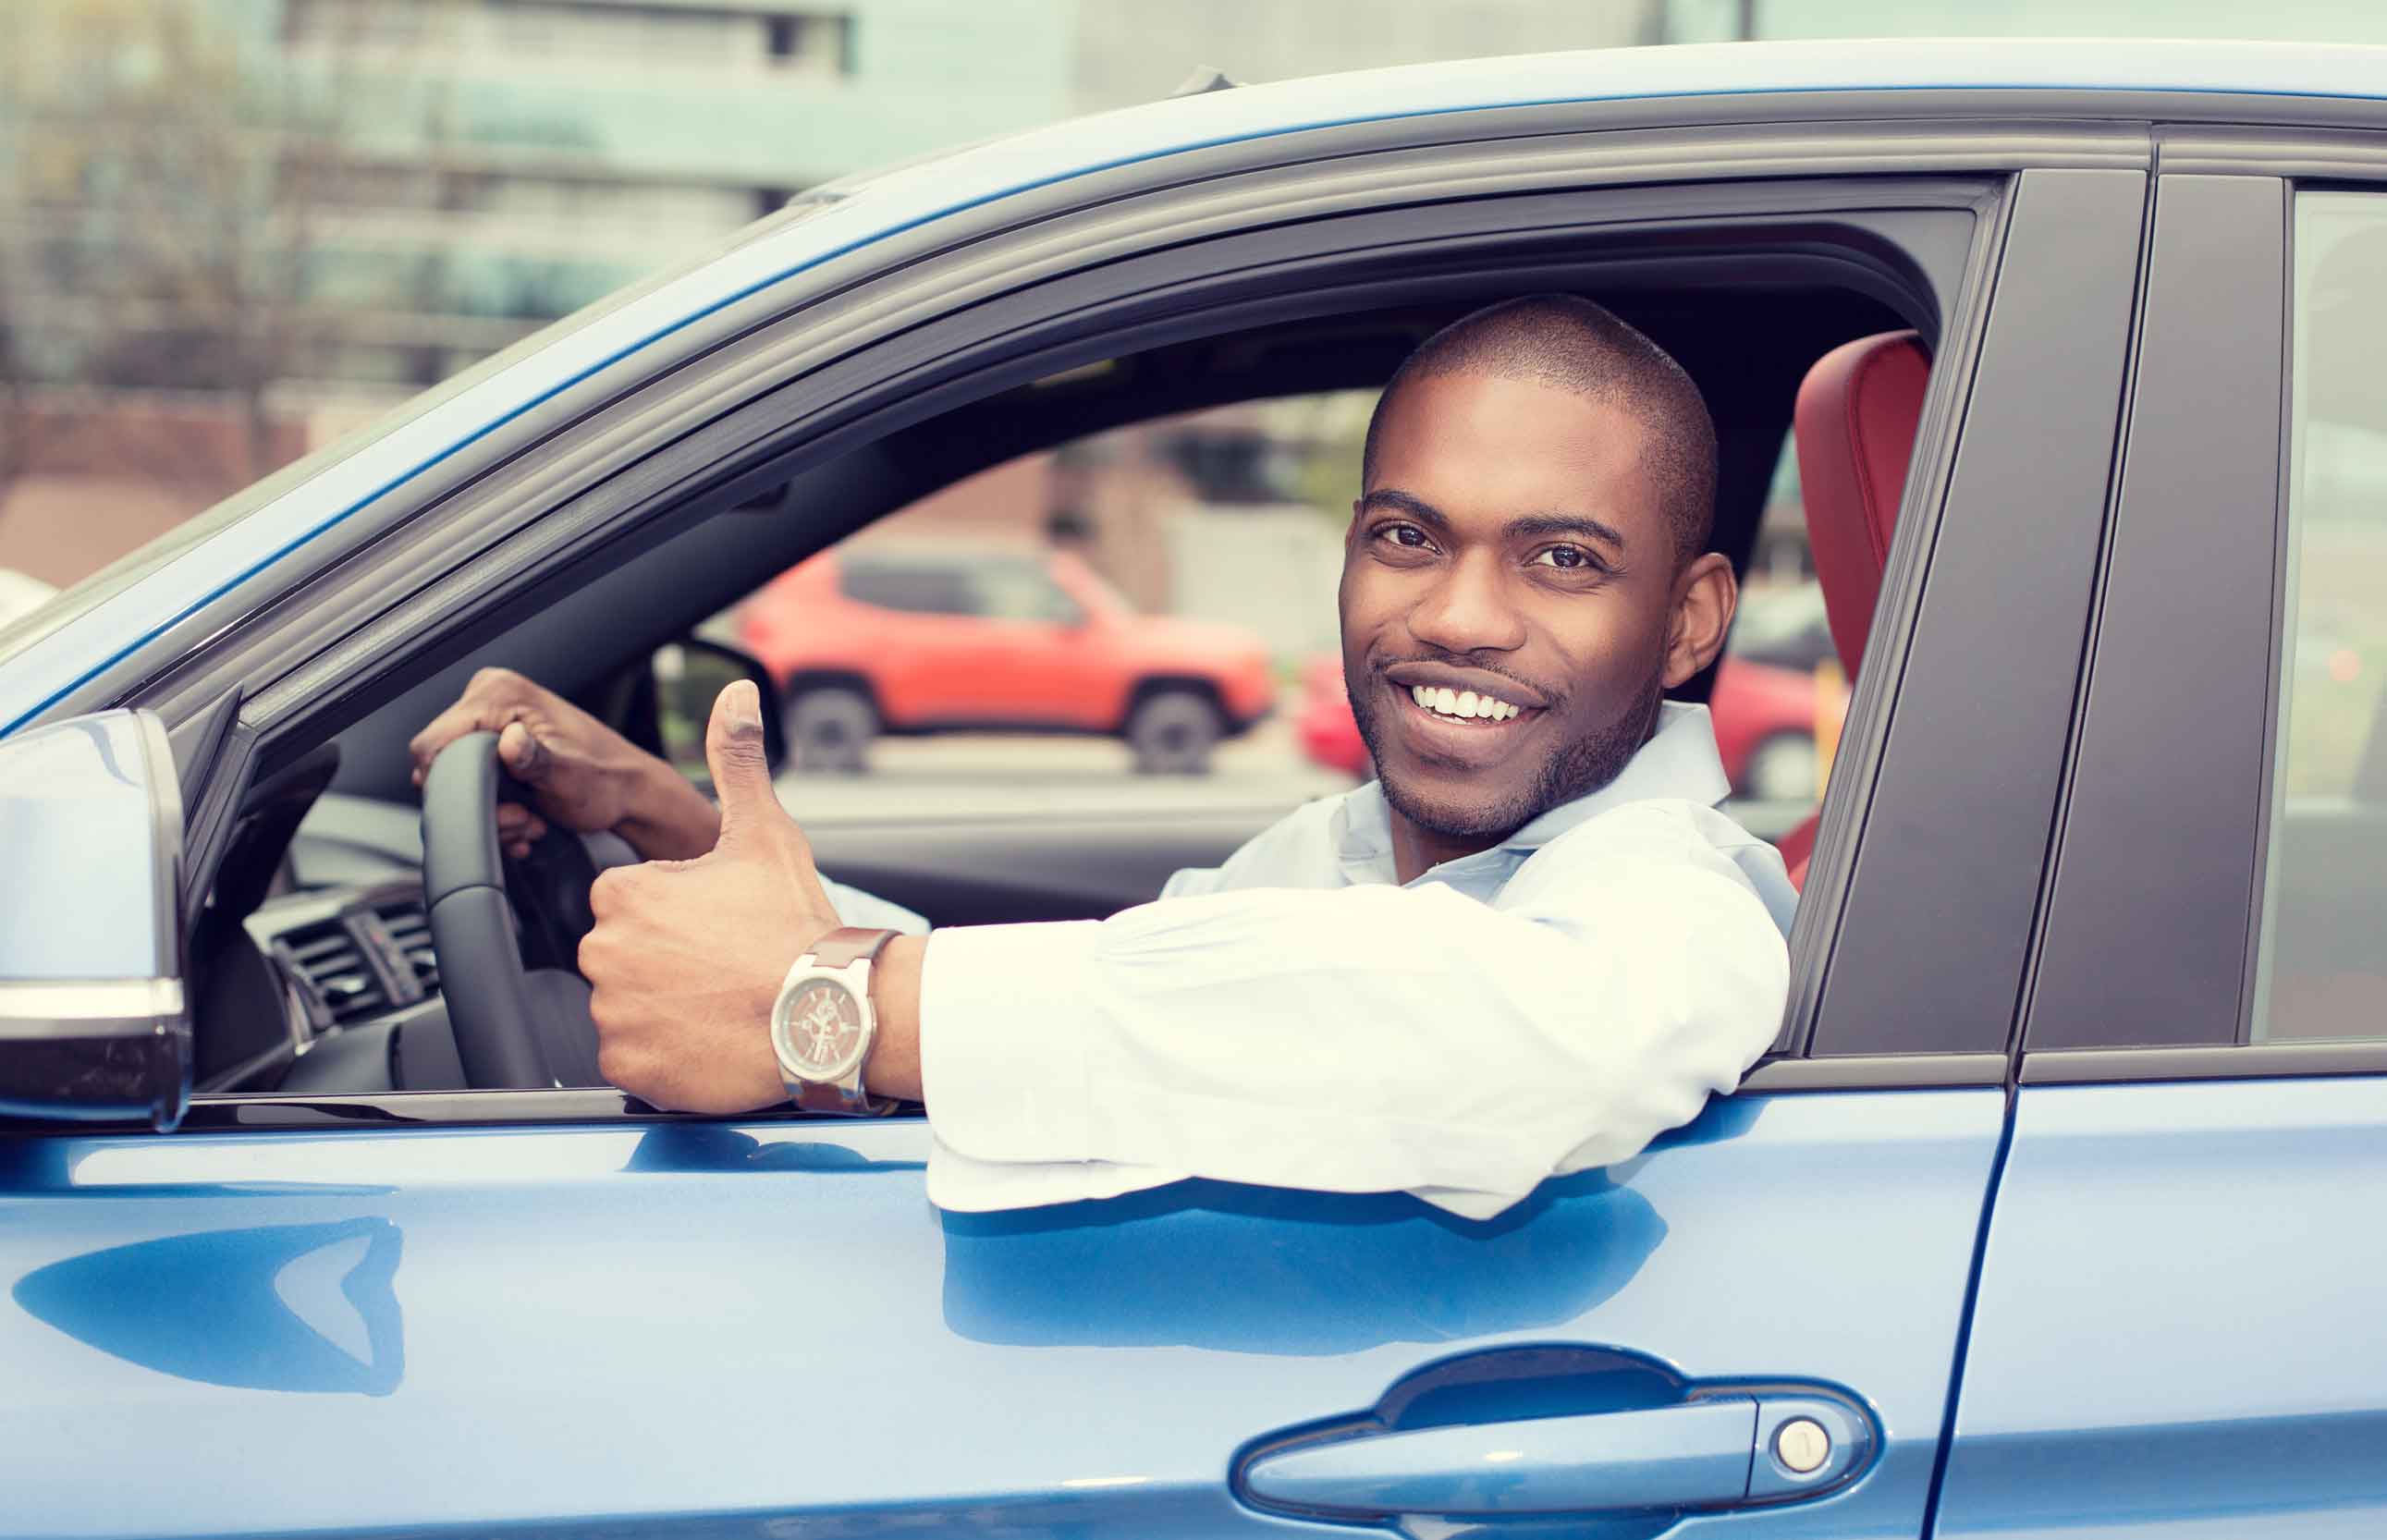 Not sure how to lease a car? We’ll walk you through the three key steps.